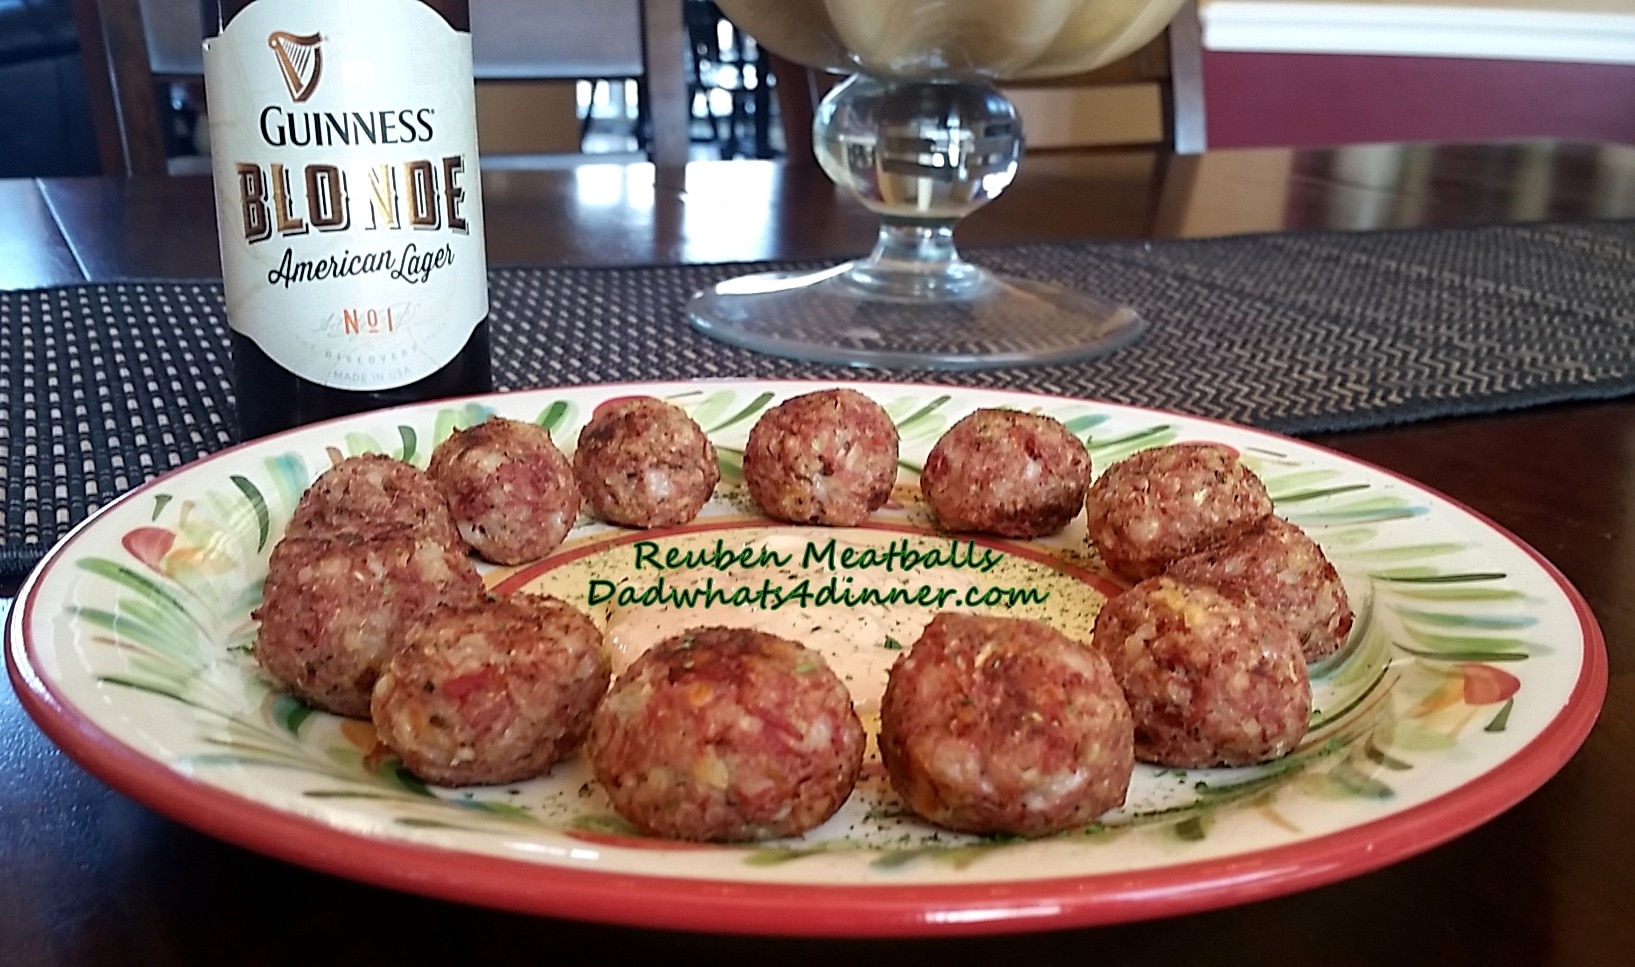 Get your green on for St. Patrick's Day with these Reuben Meatballs!